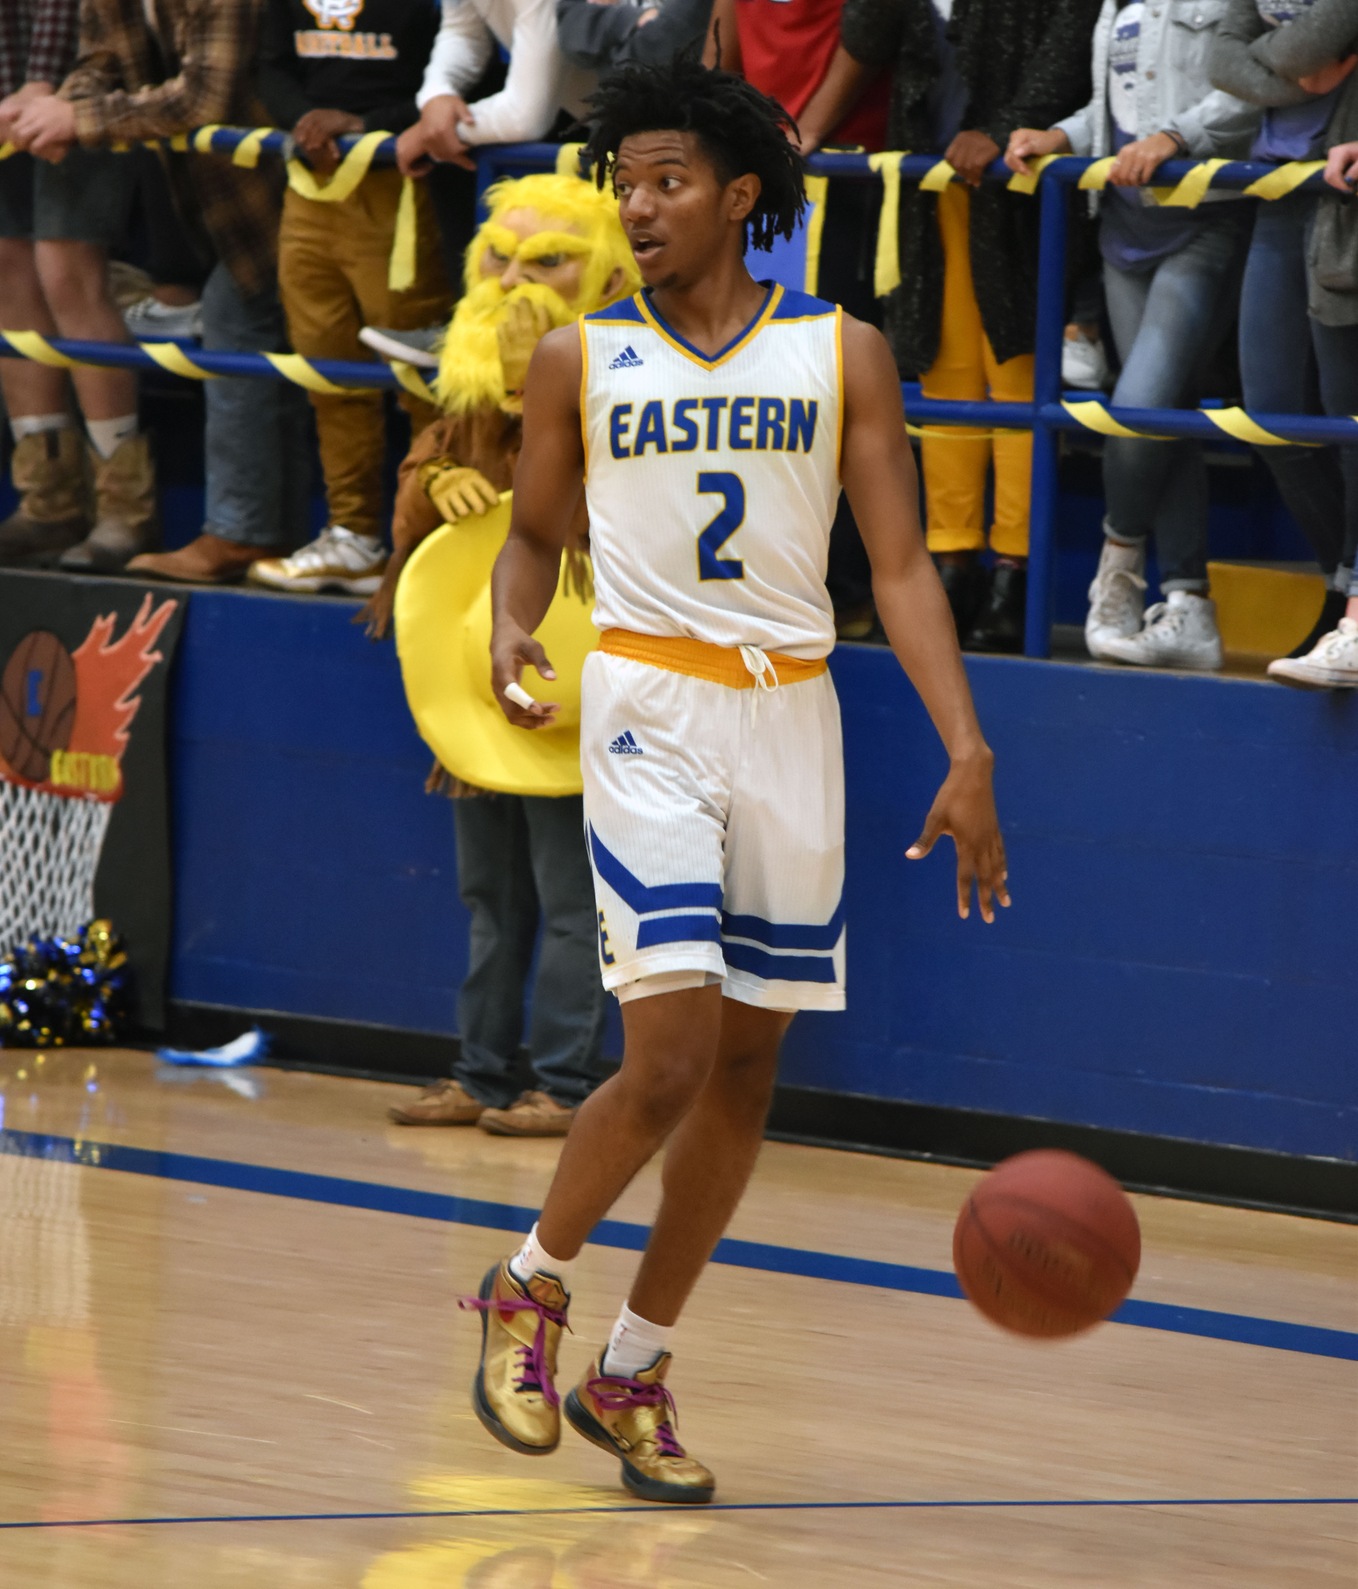 Stefone Richardson had 14 points off the bench as Eastern won, 126-99, against Nation Wide Academy. (Photo from earlier season game)